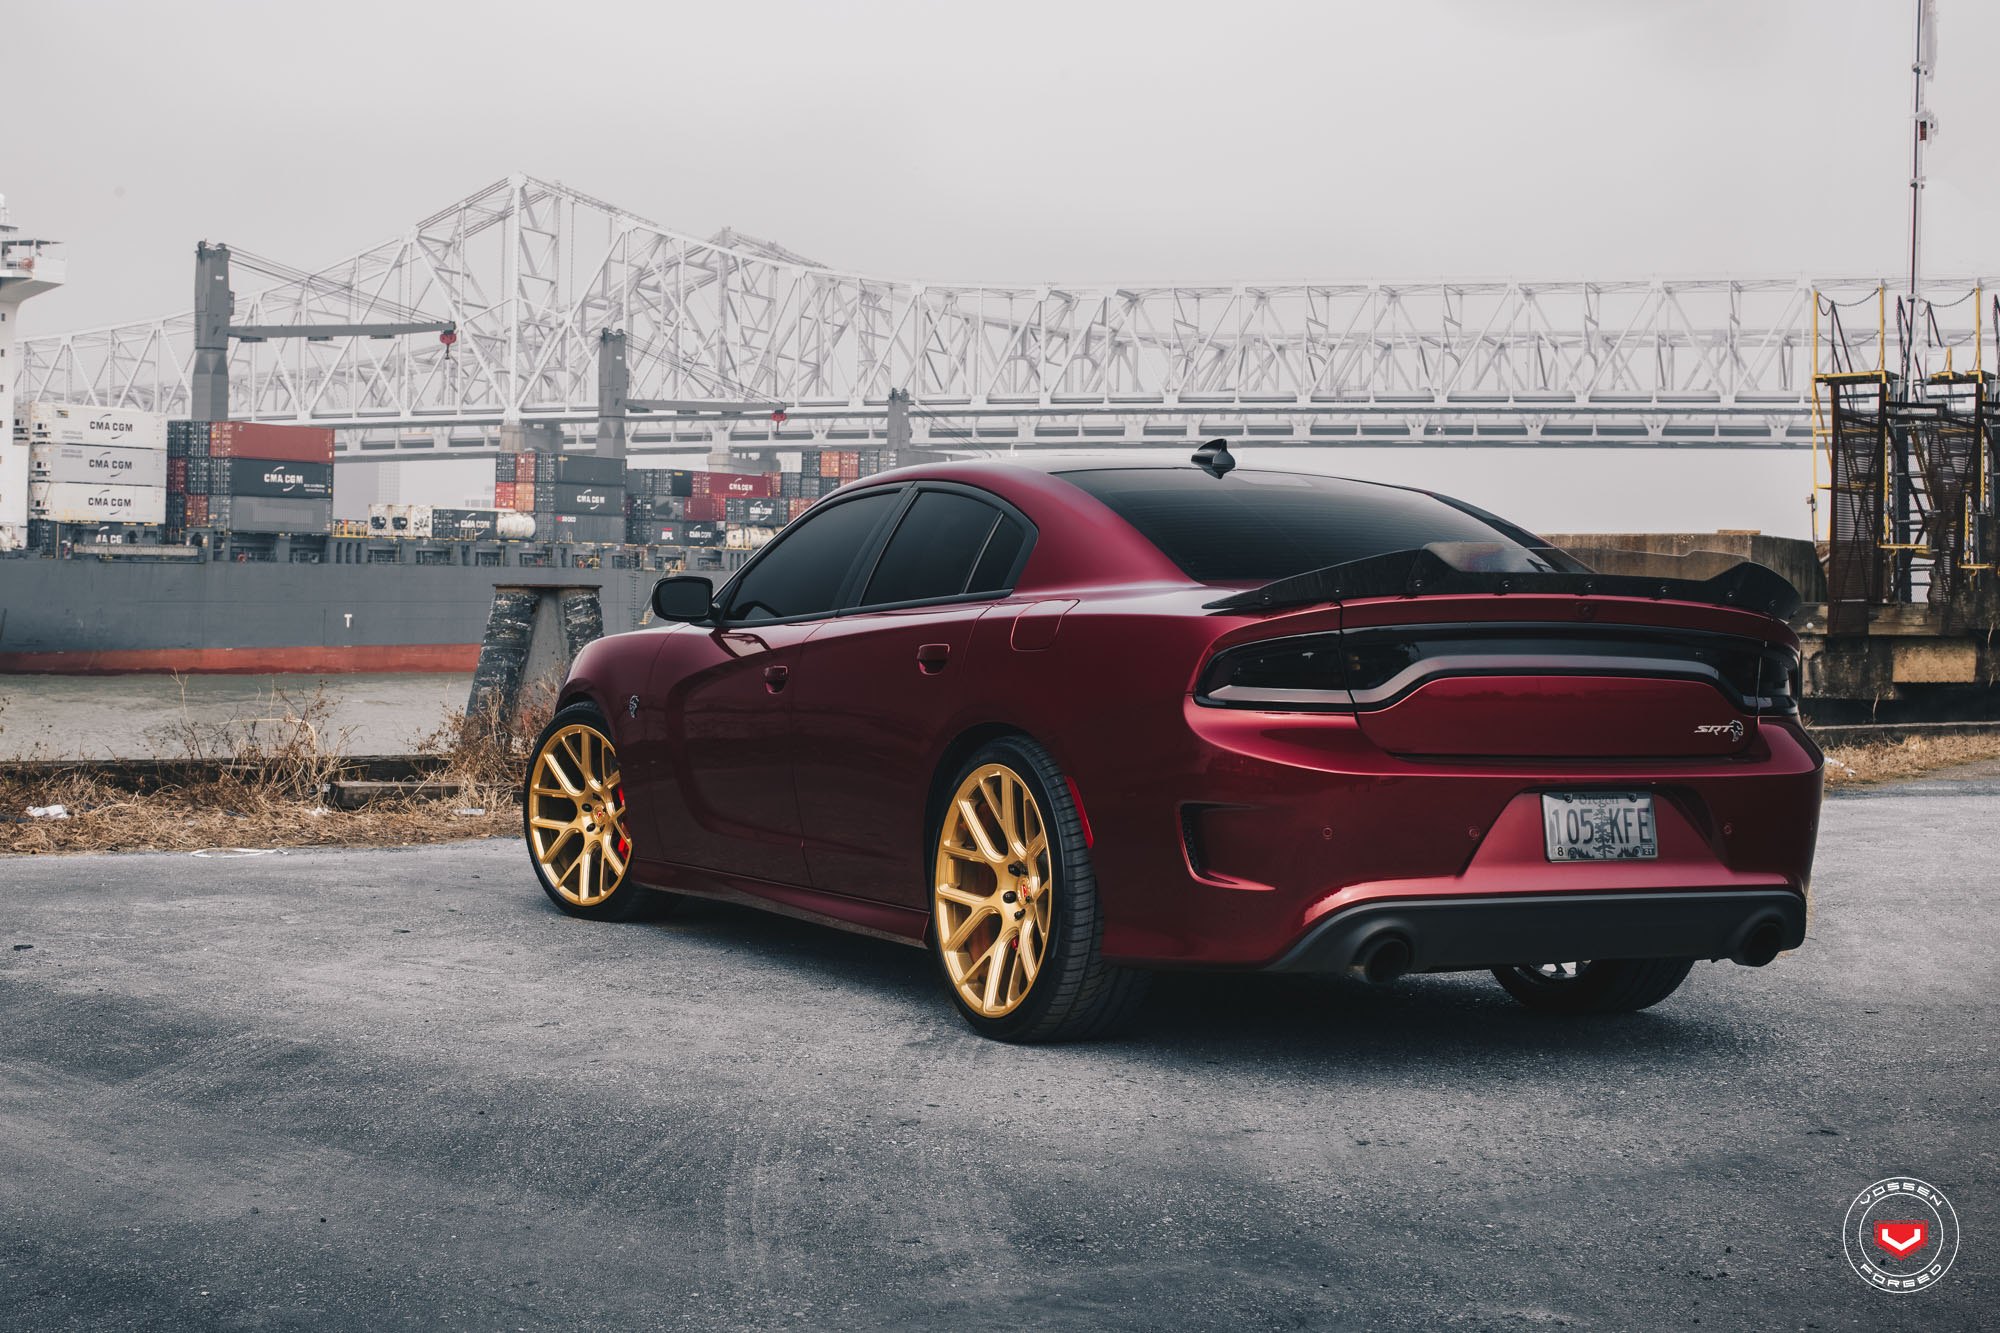 Red Dodge Charger SRT with Custom Rear Diffuser - Photo by Vossen